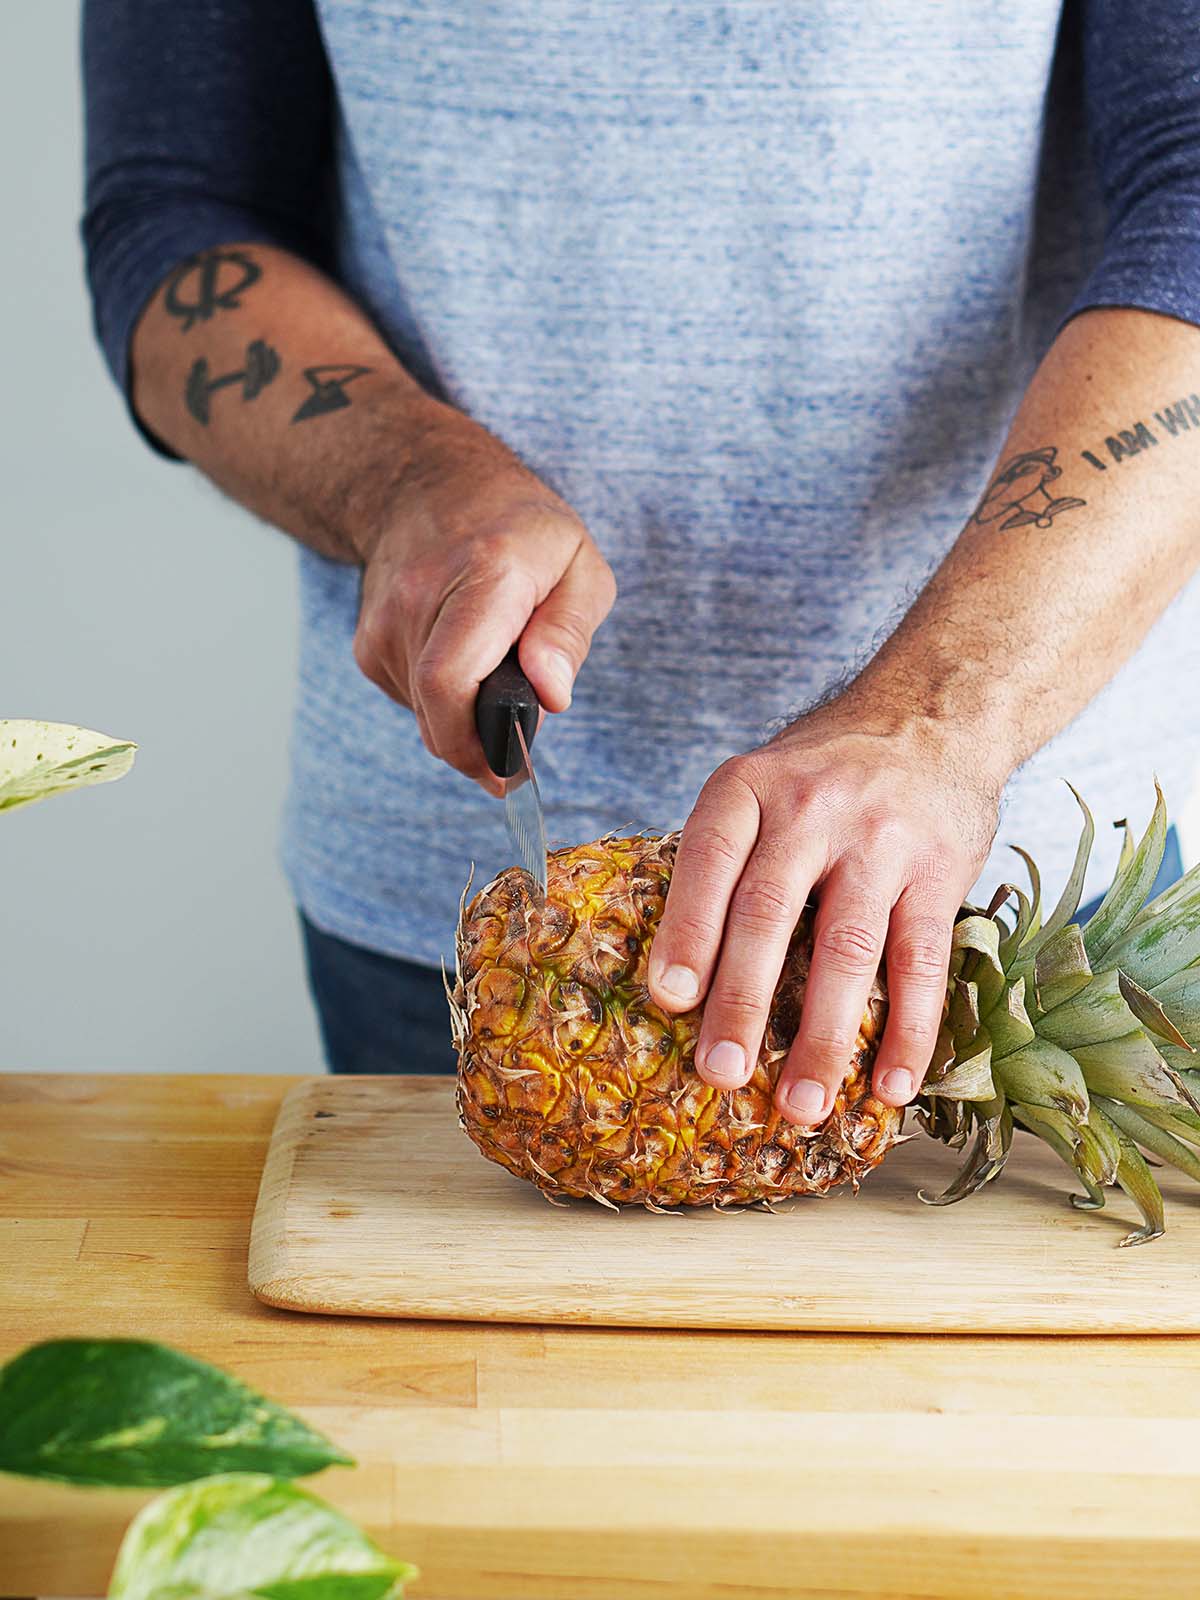 How To Slice a Pineapple